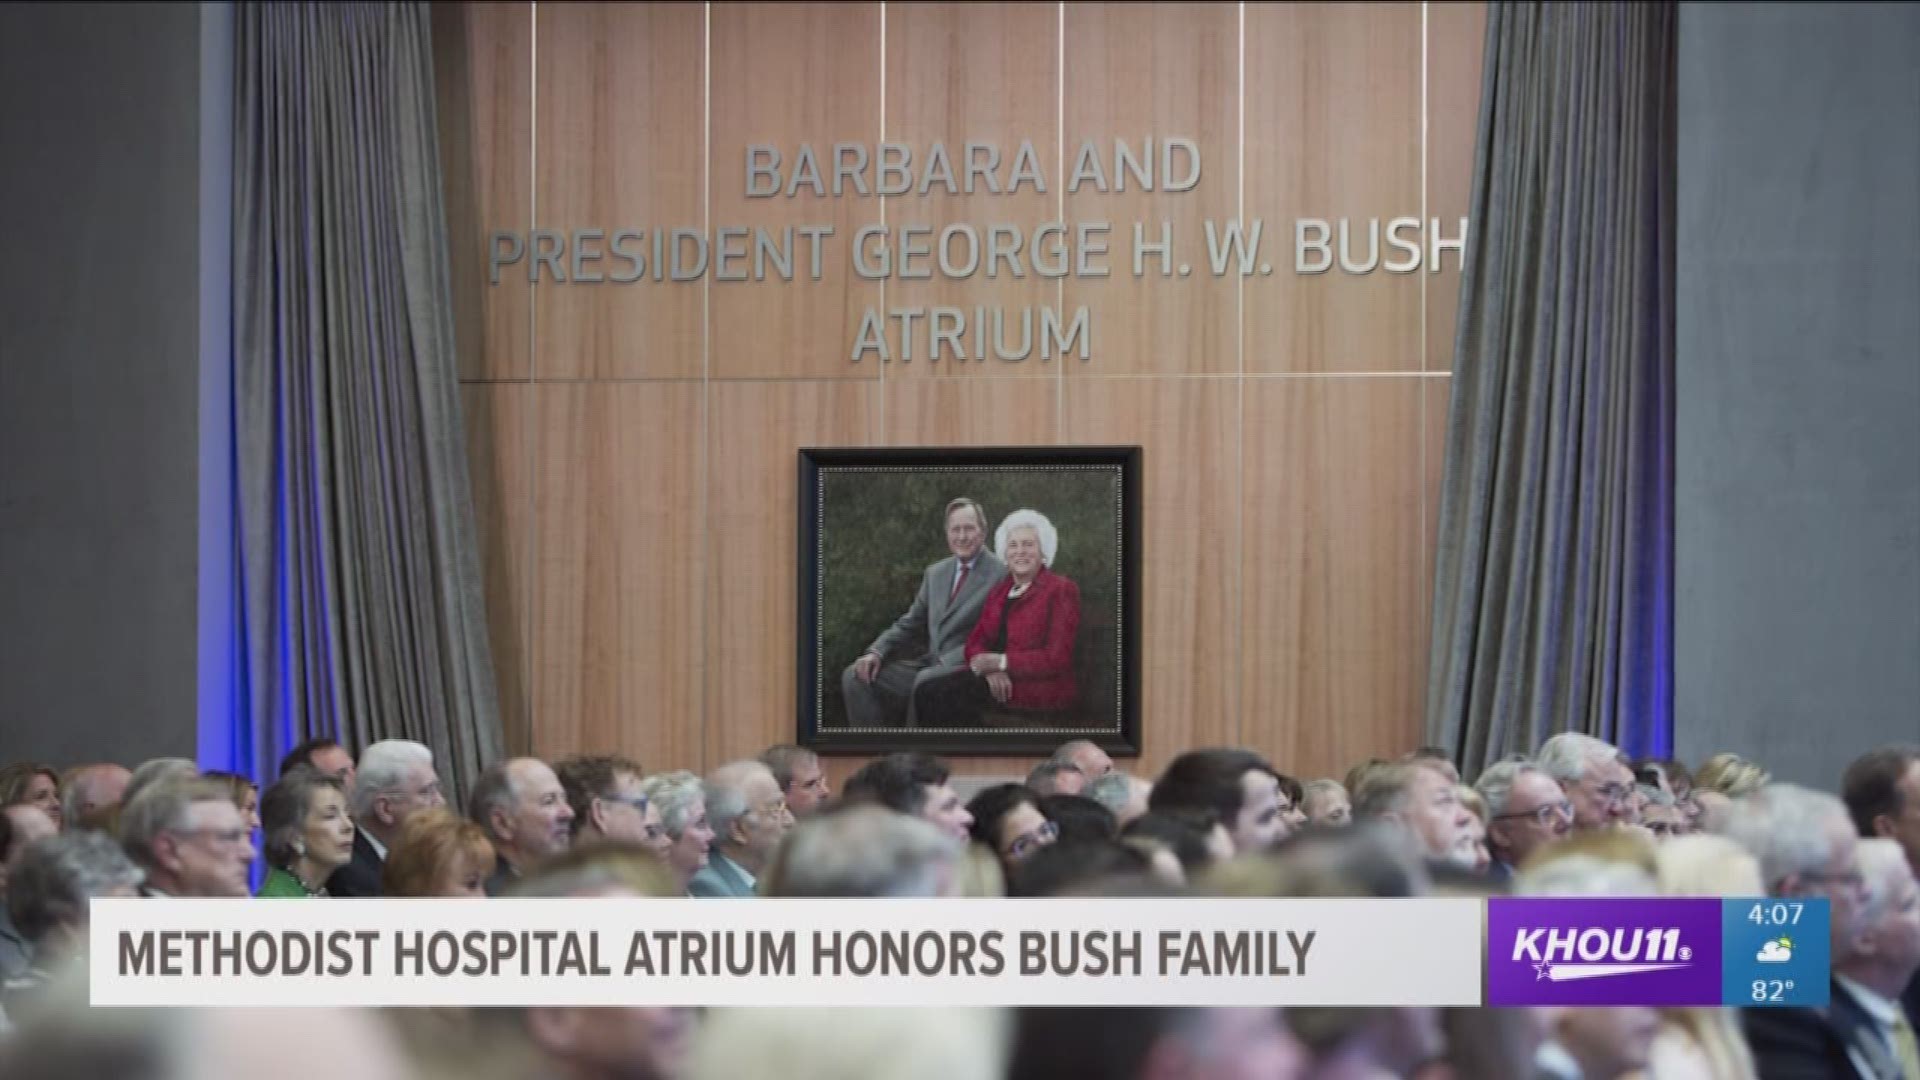 Houston Methodist Hospital has named the atrium in the new Walter Tower the Barbara and President George H.W. Bush Atrium.